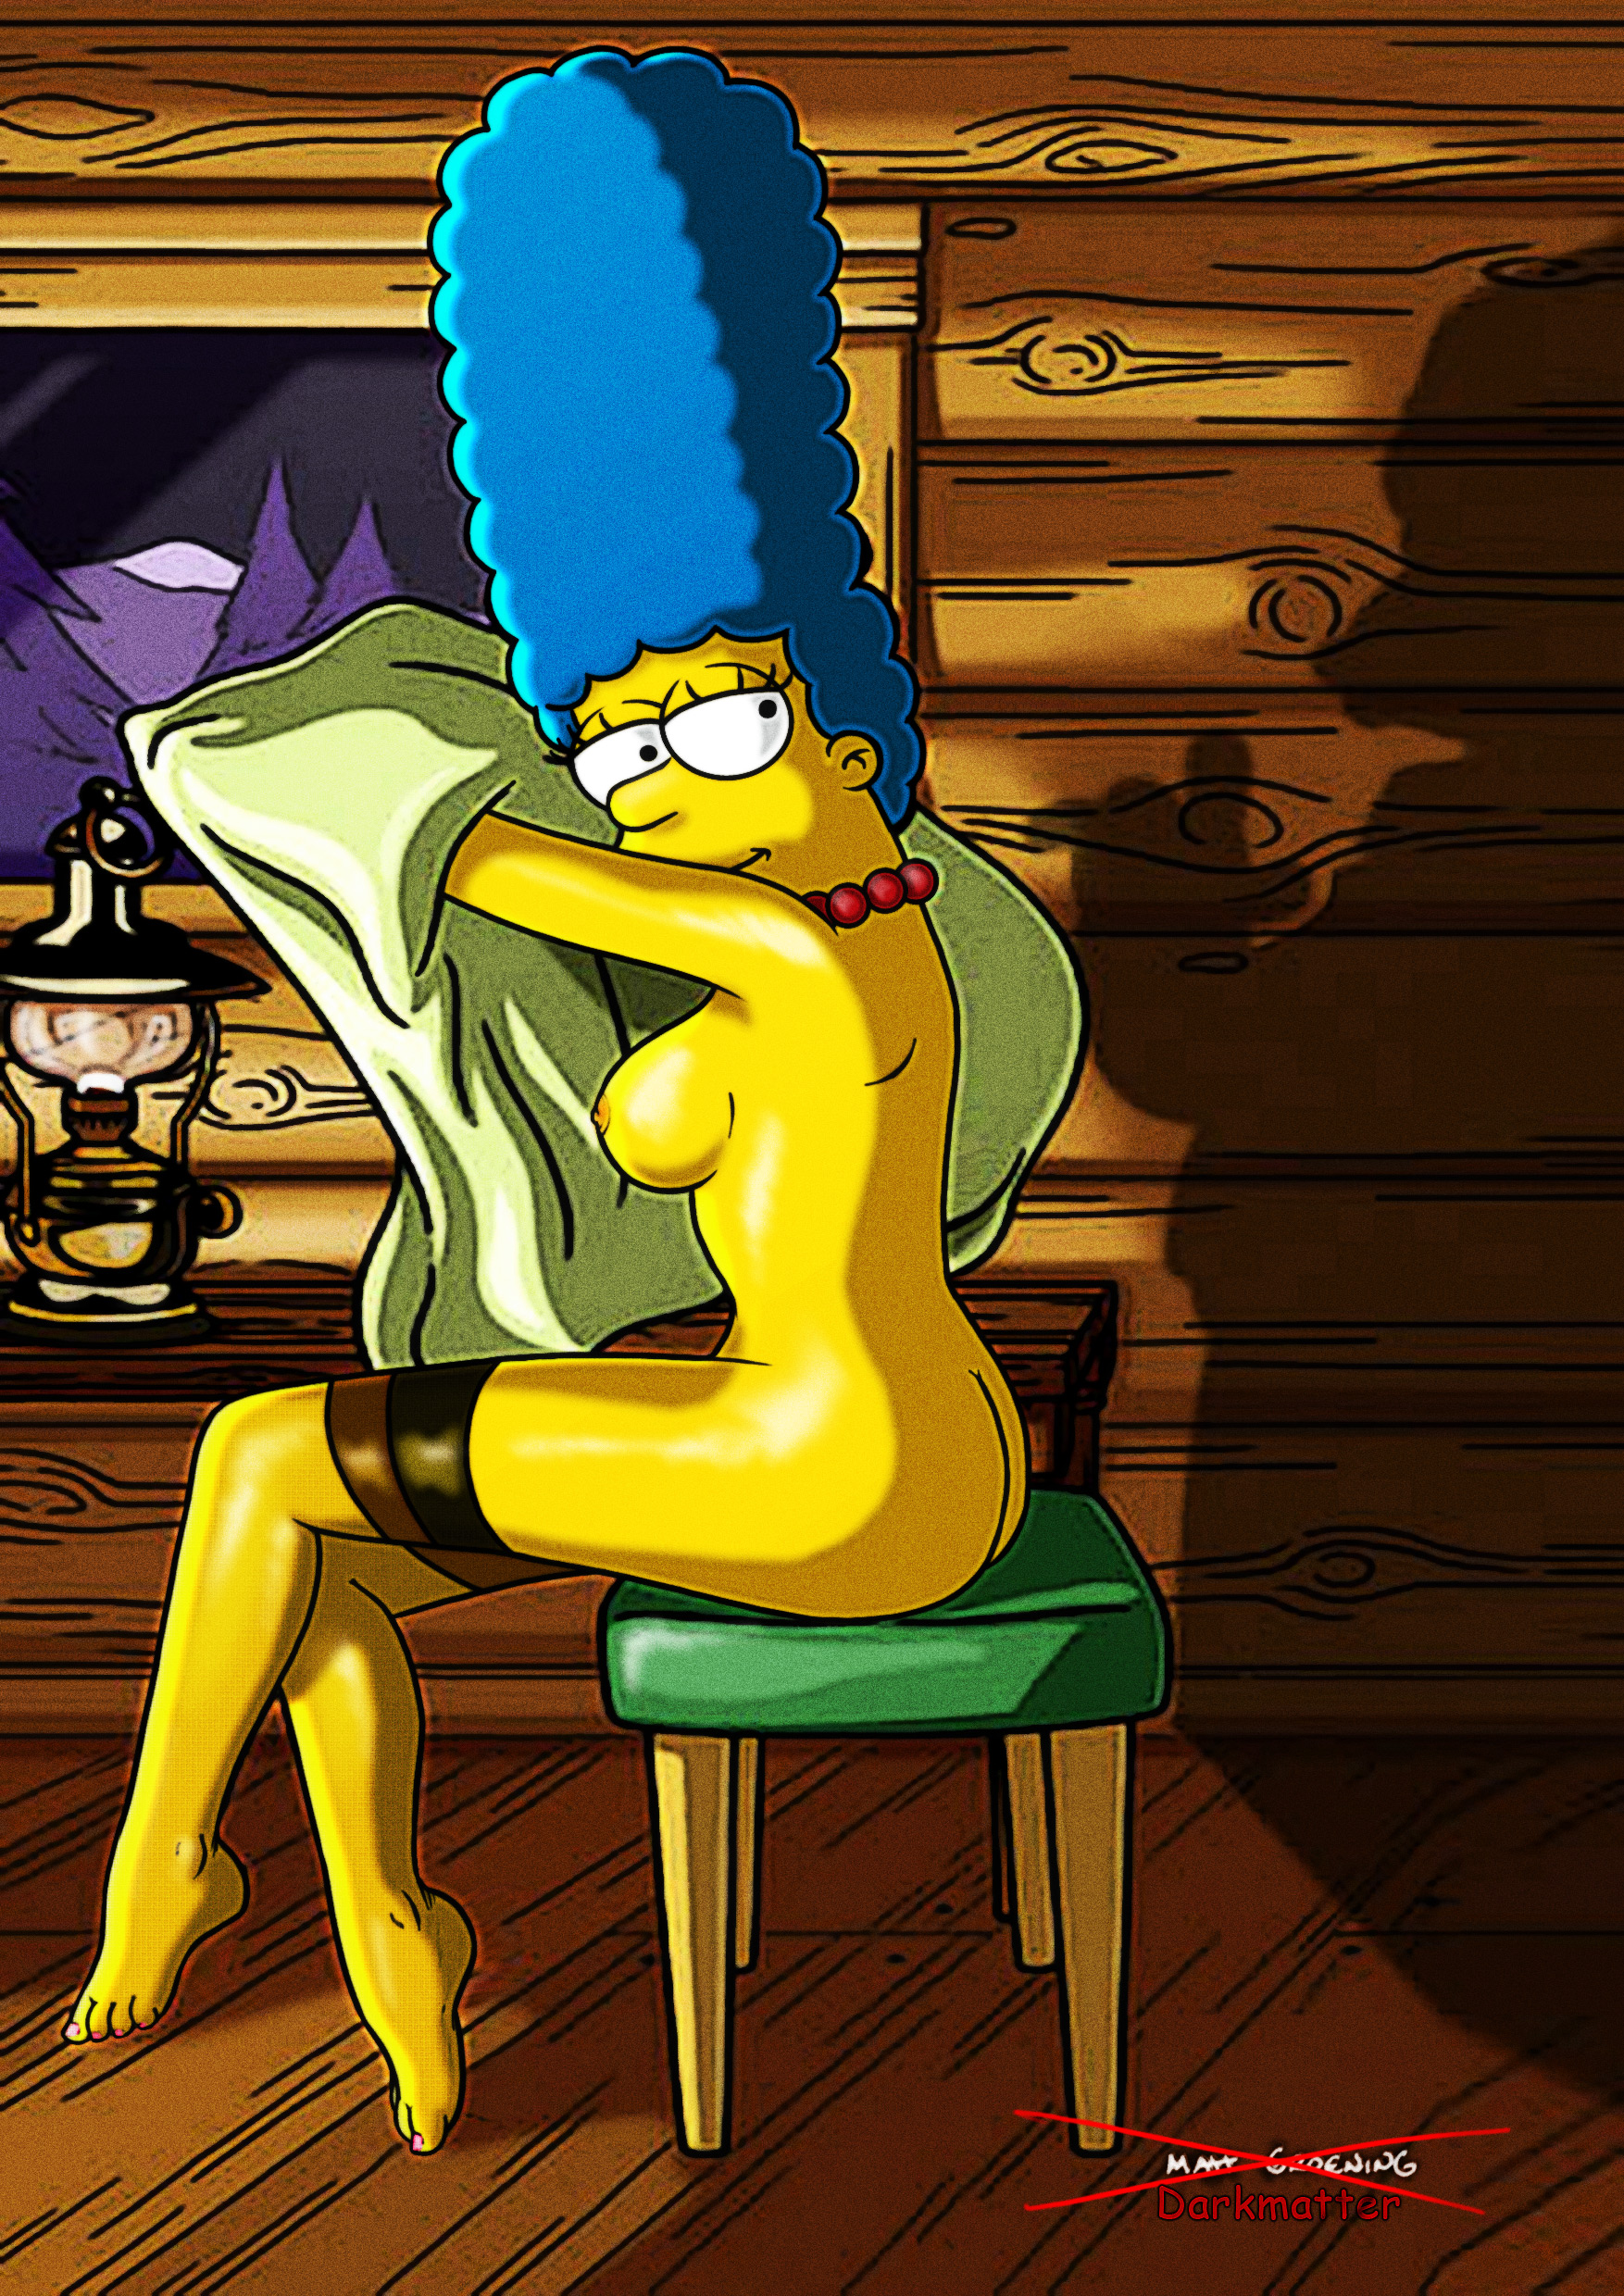 #pic366835: Darkmatter - Marge Simpson - Playboy - The Simpsons.